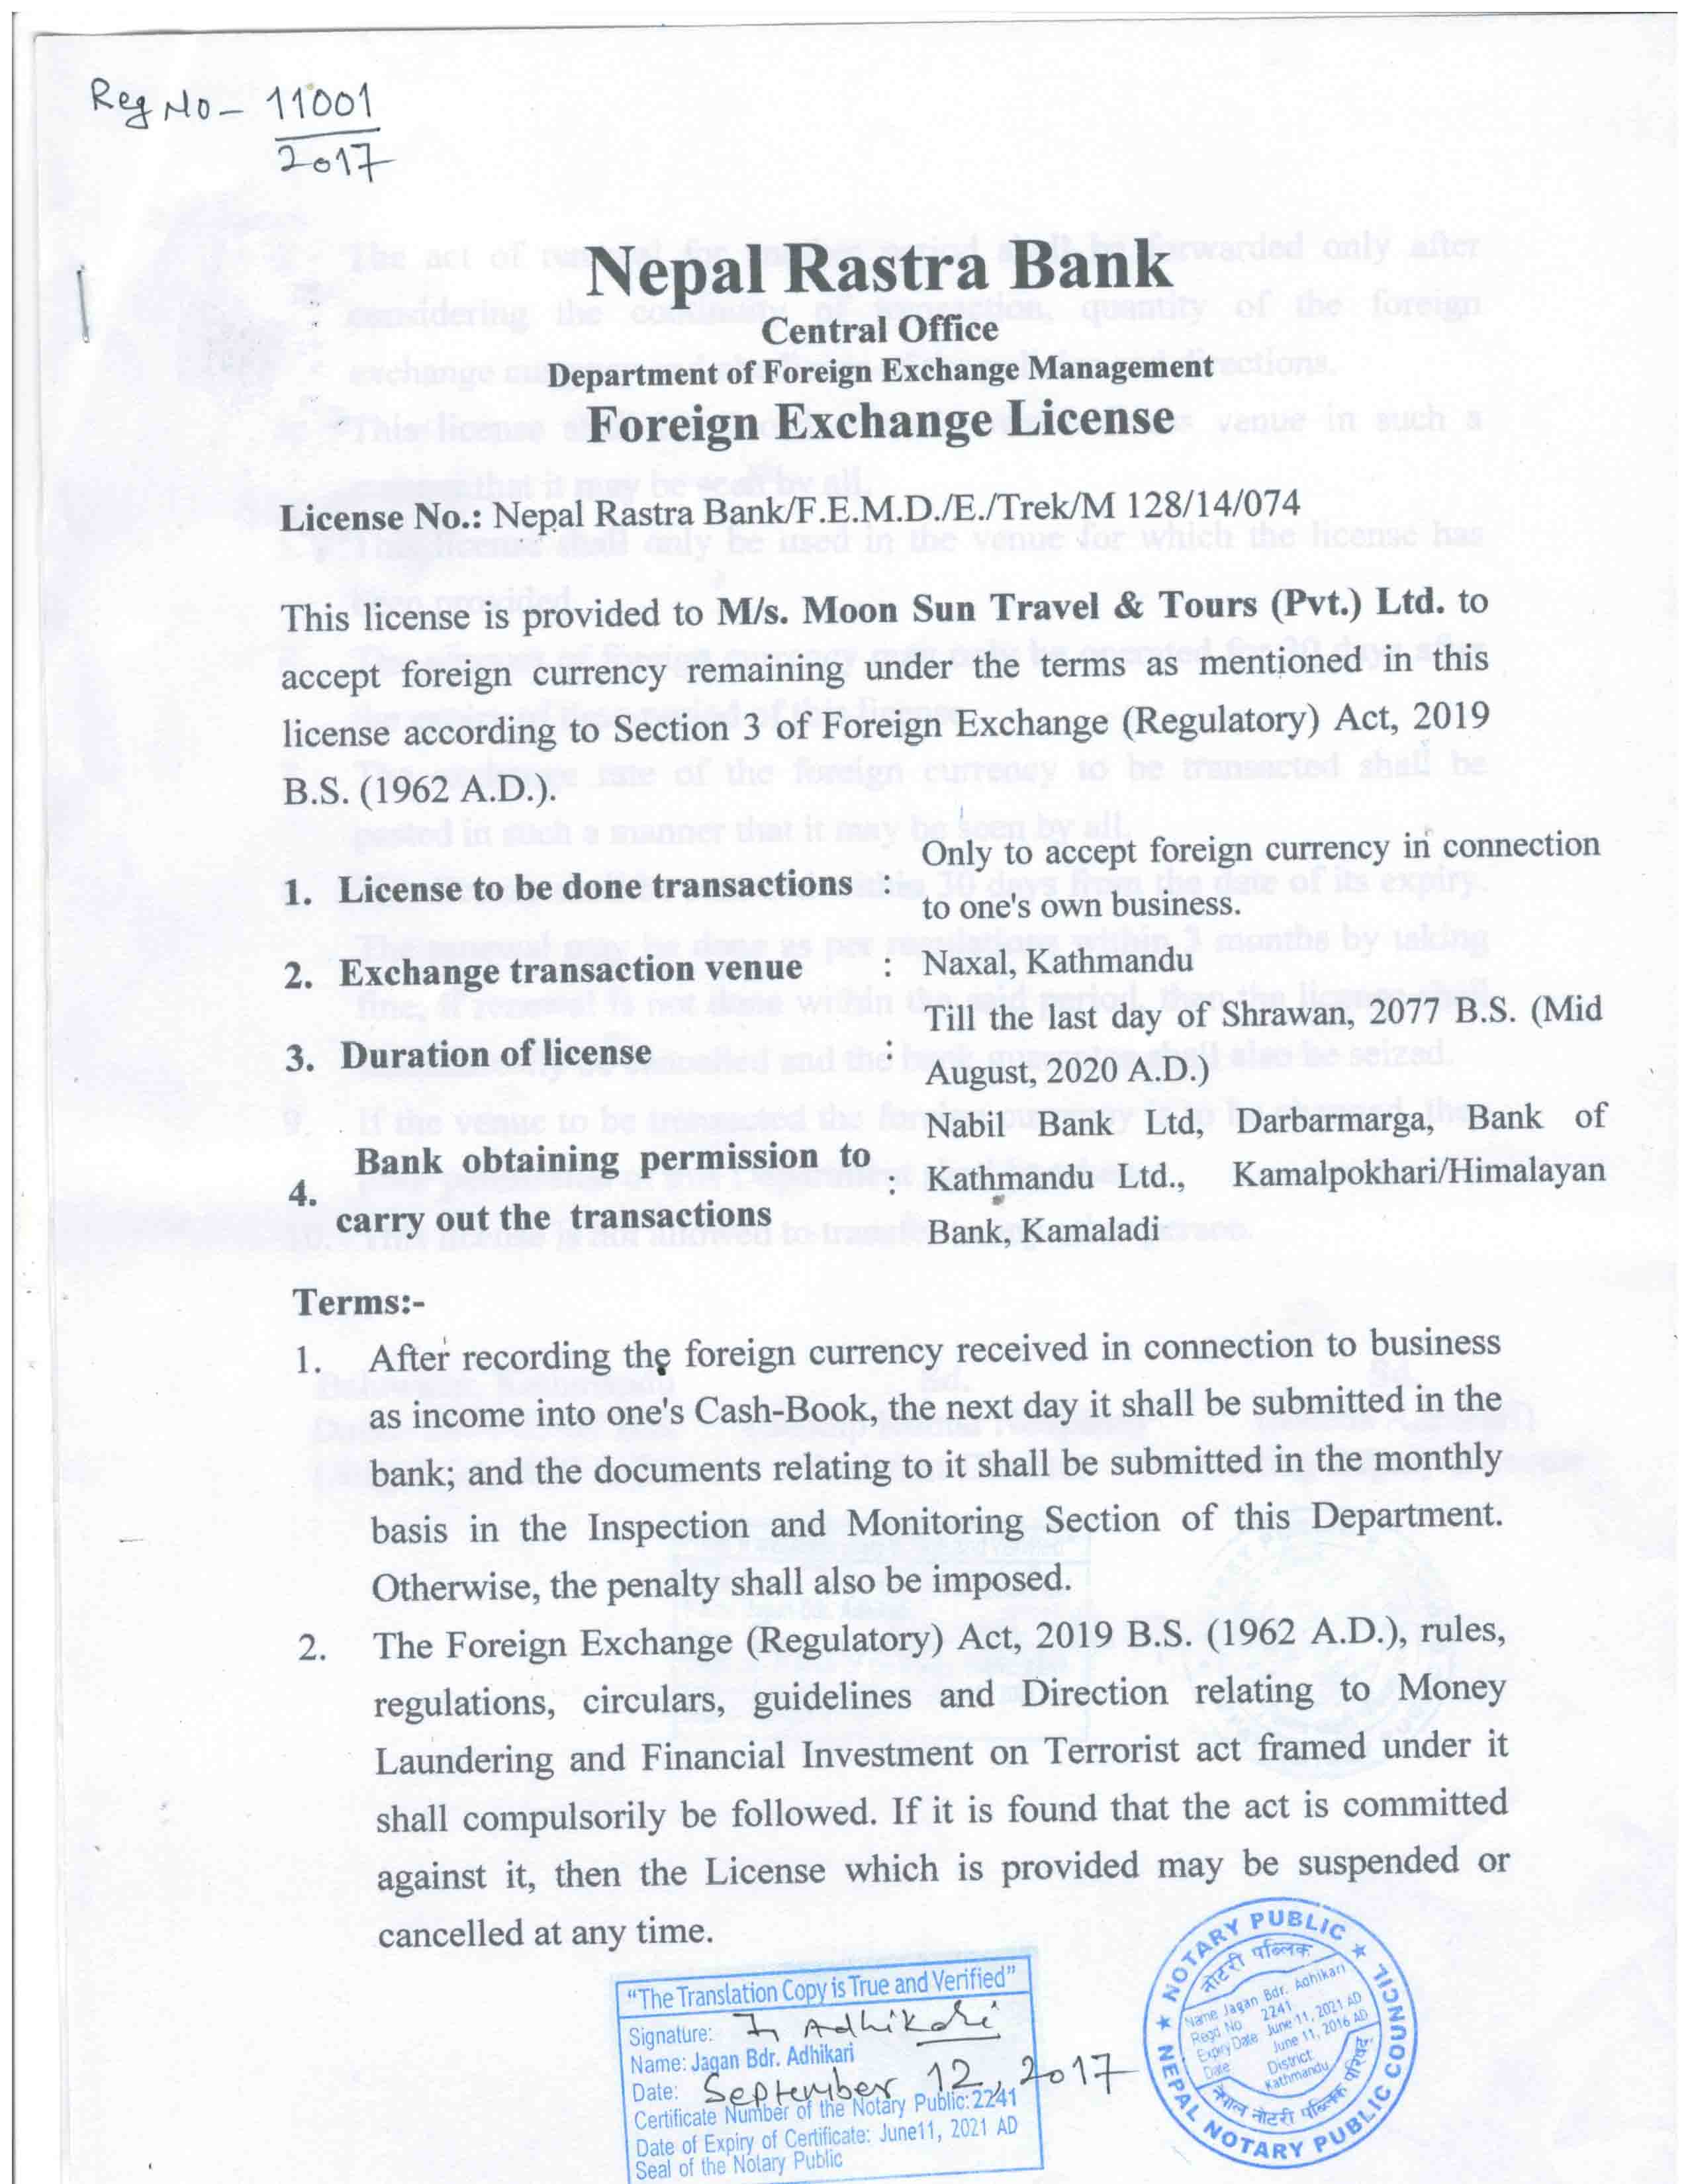 Nepal Rastra Bank - Foreign Exchange License - Page 1 of 2